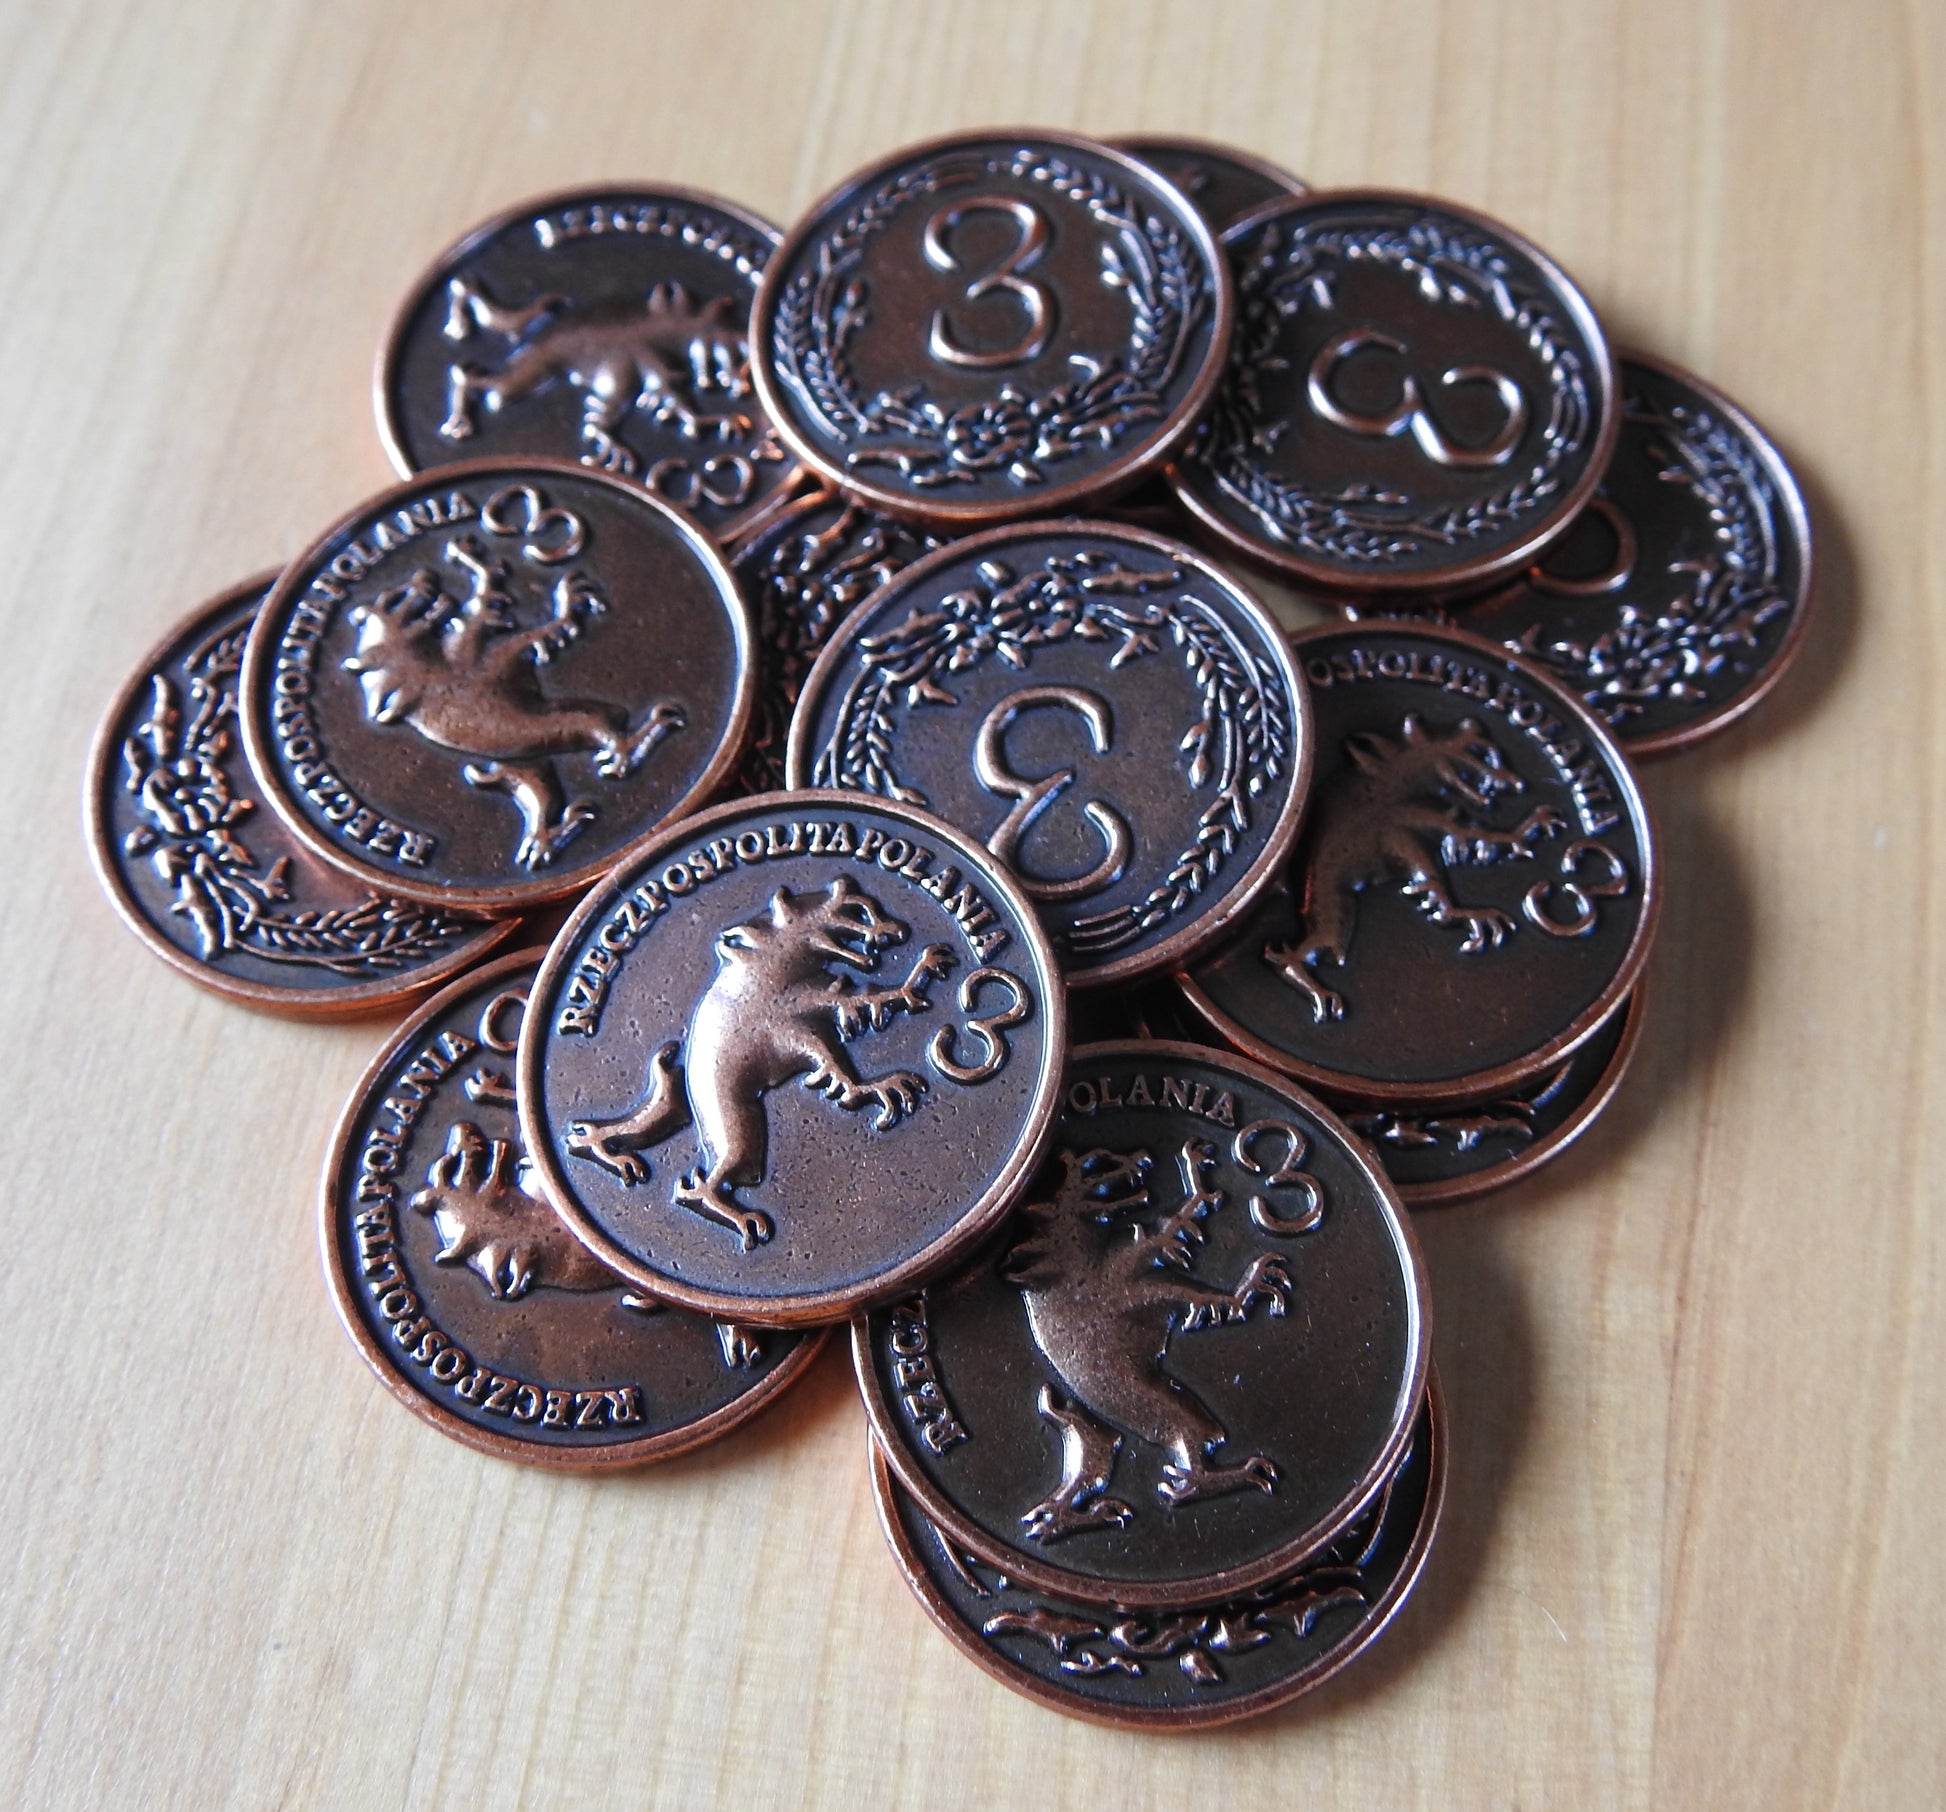 Close-up view of the bronze $3 coins.